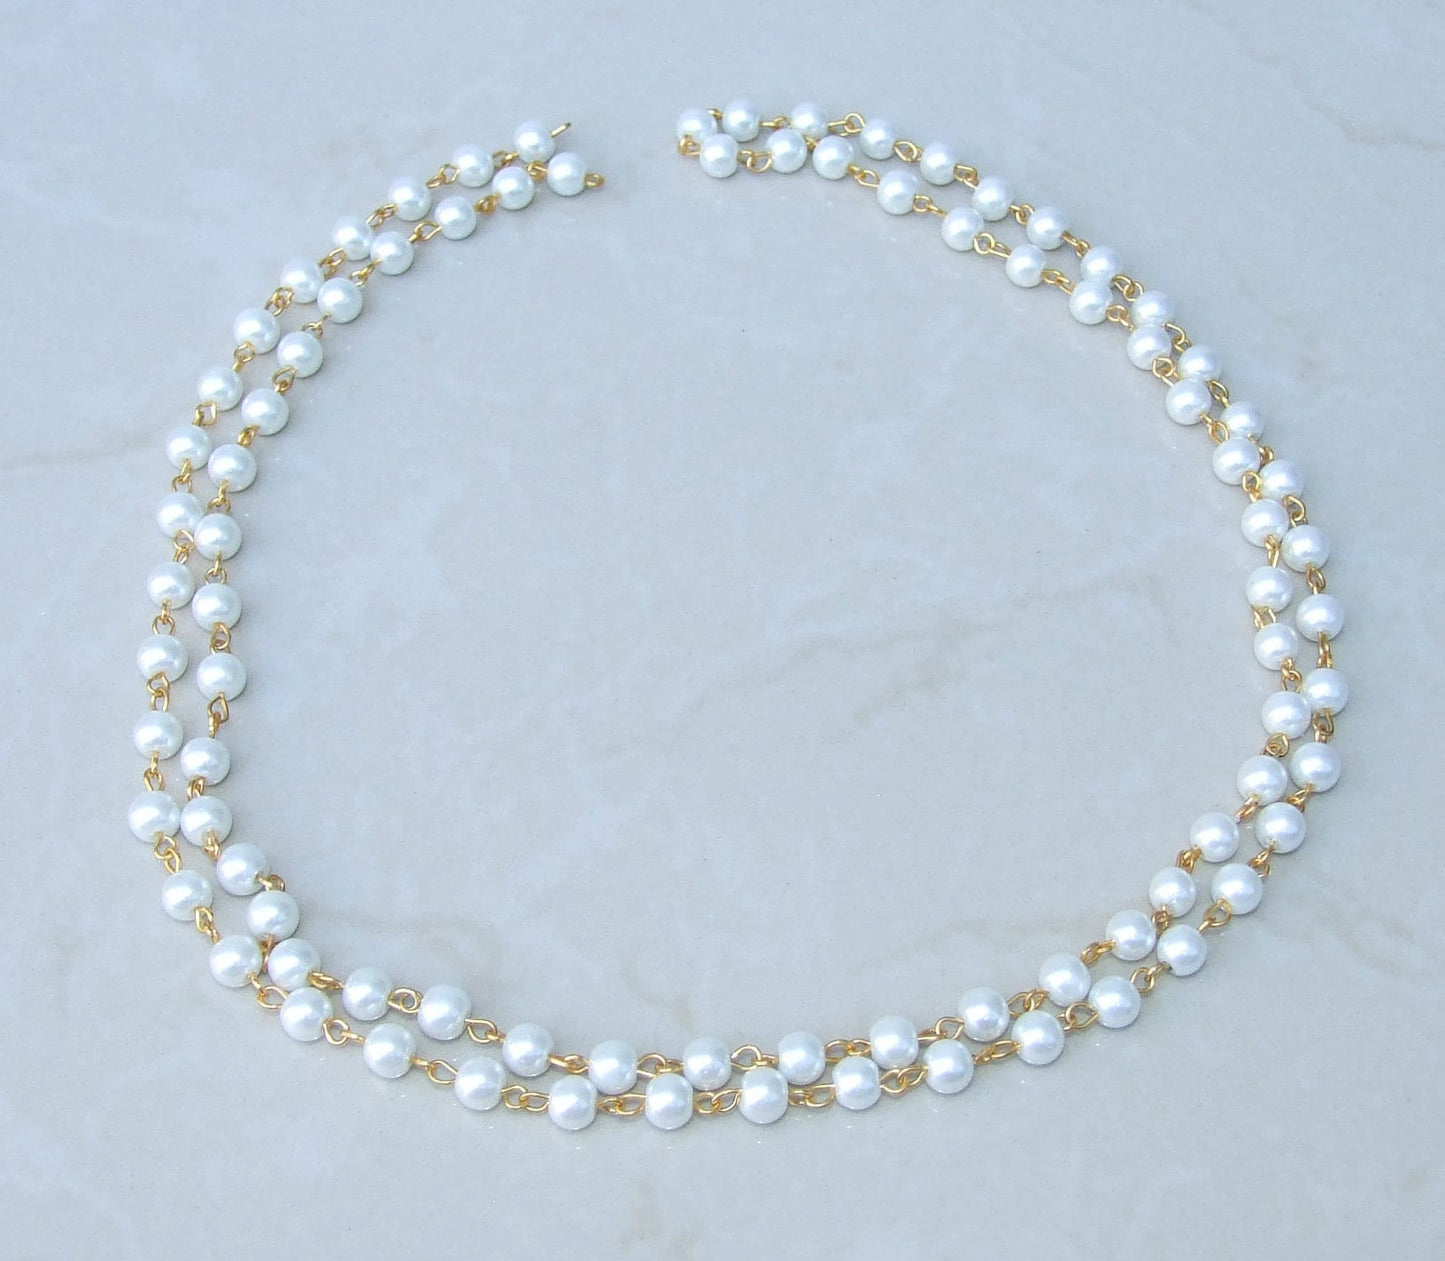 White Pearl Rosary Chain, 1 Meter, Bulk Chain, Round Glass Beads, Beaded Chain, Body Chain, Gold Chain, Necklace Chain, Belly Chain, 6mm, 02